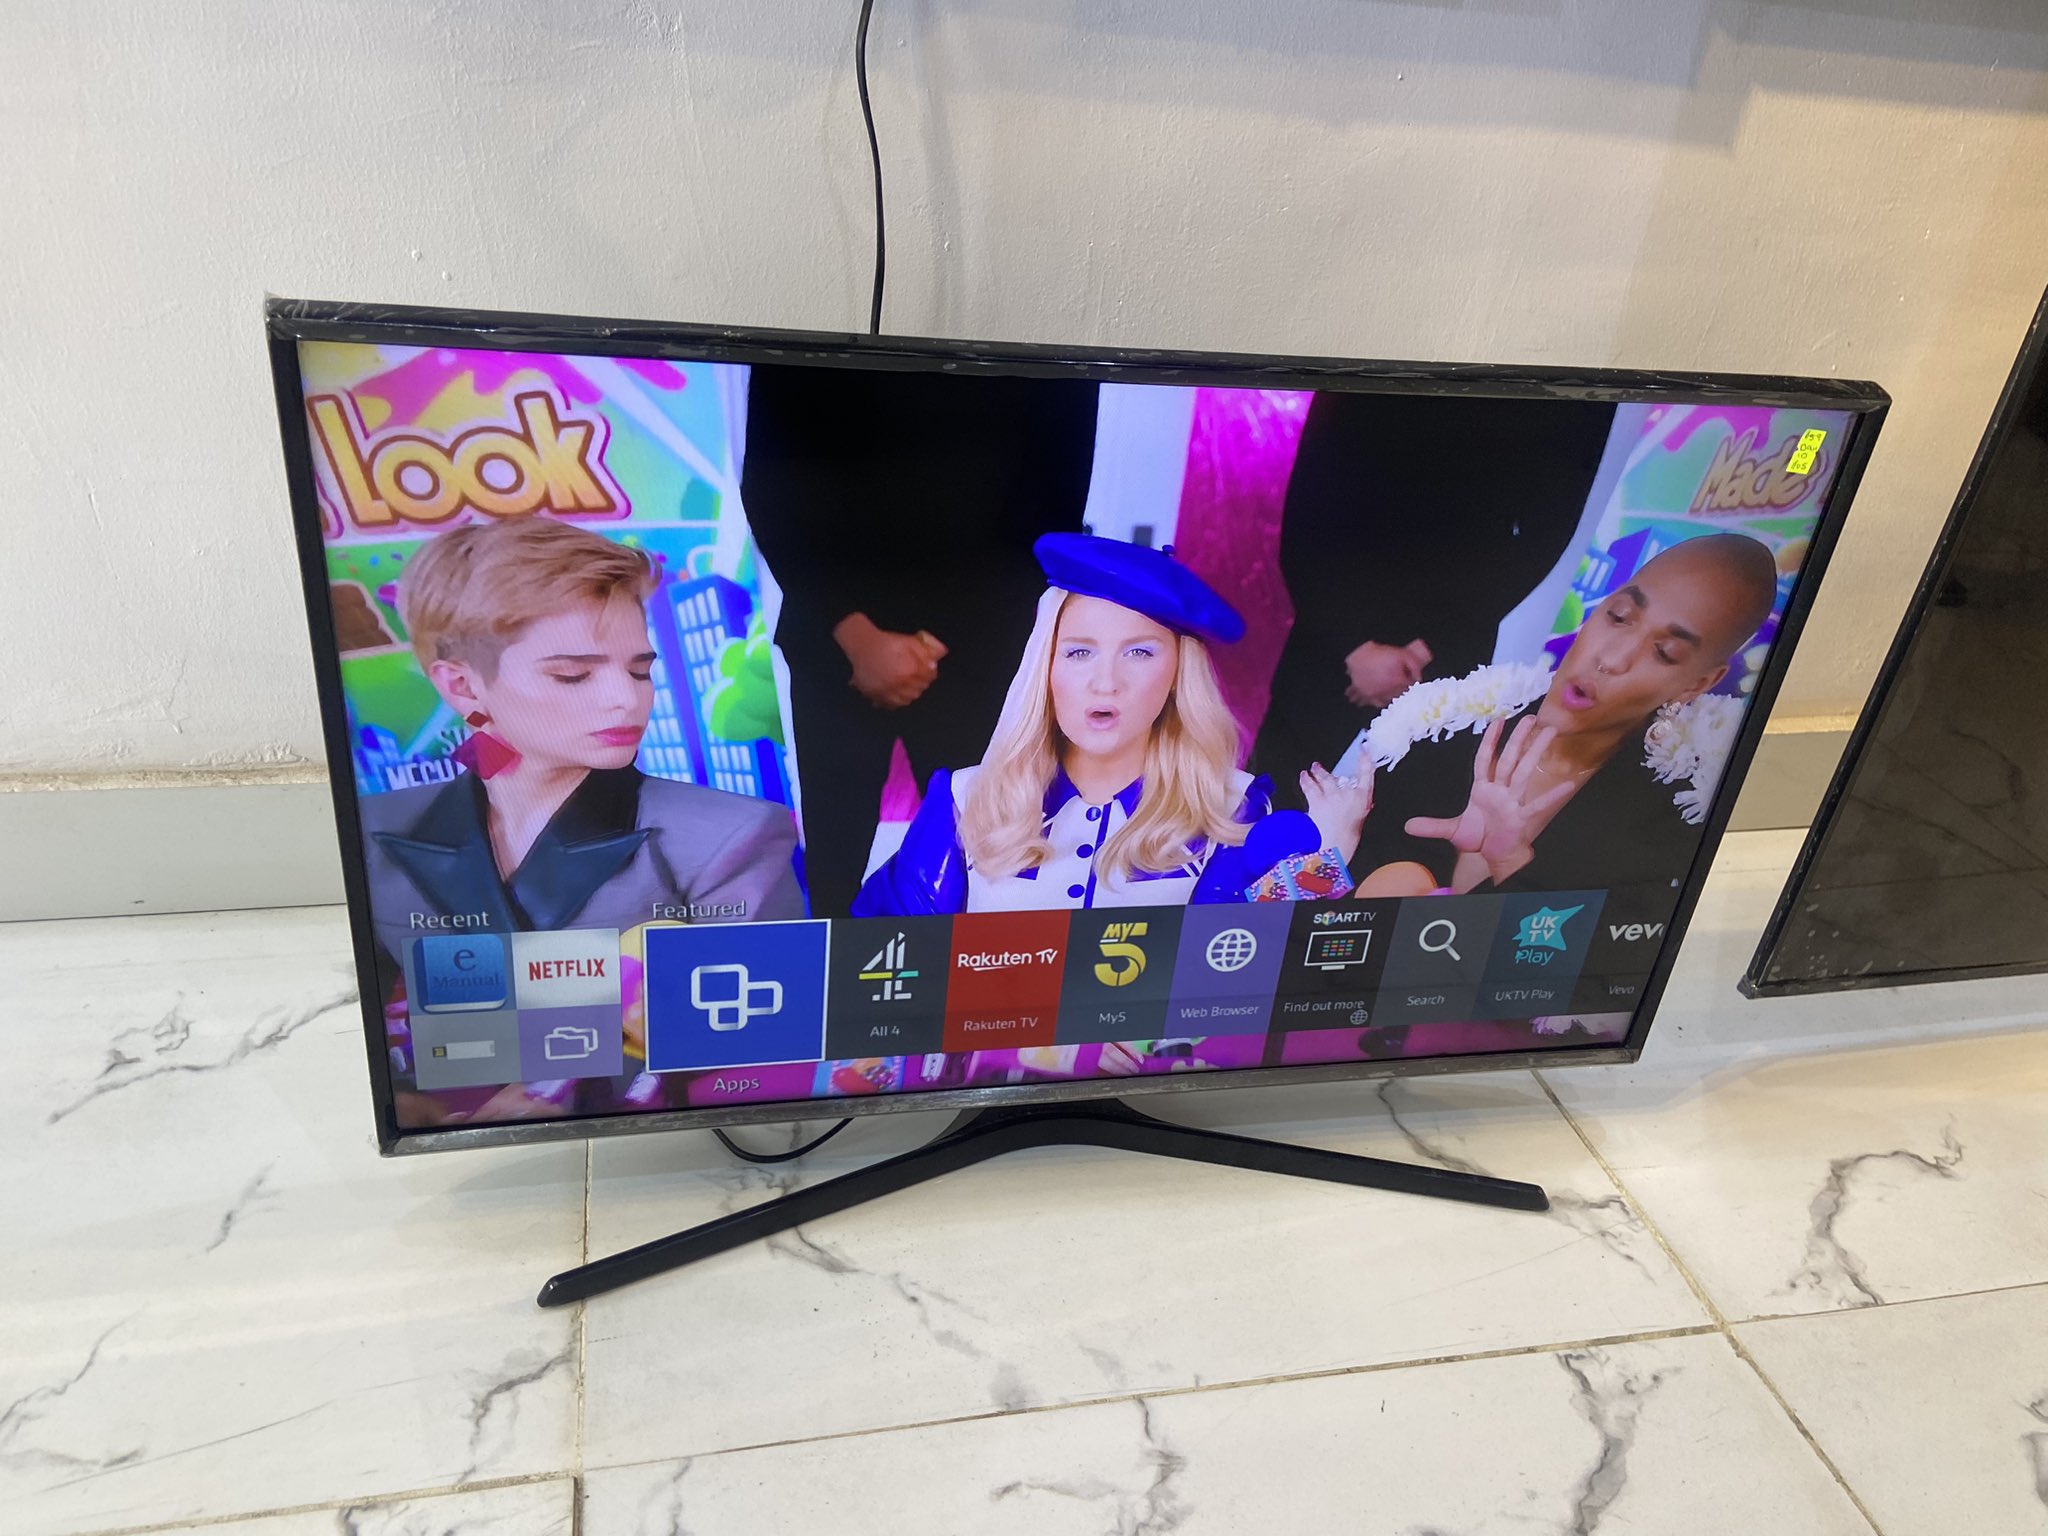 lanthan marts lemmer Onlinealaba smart TVs and general electronics on Twitter: "Samsung 32” smart  tv with WiFi direct, Bluetooth Netflix etc Price - N85k  https://t.co/B4SIf9oYn6" / Twitter